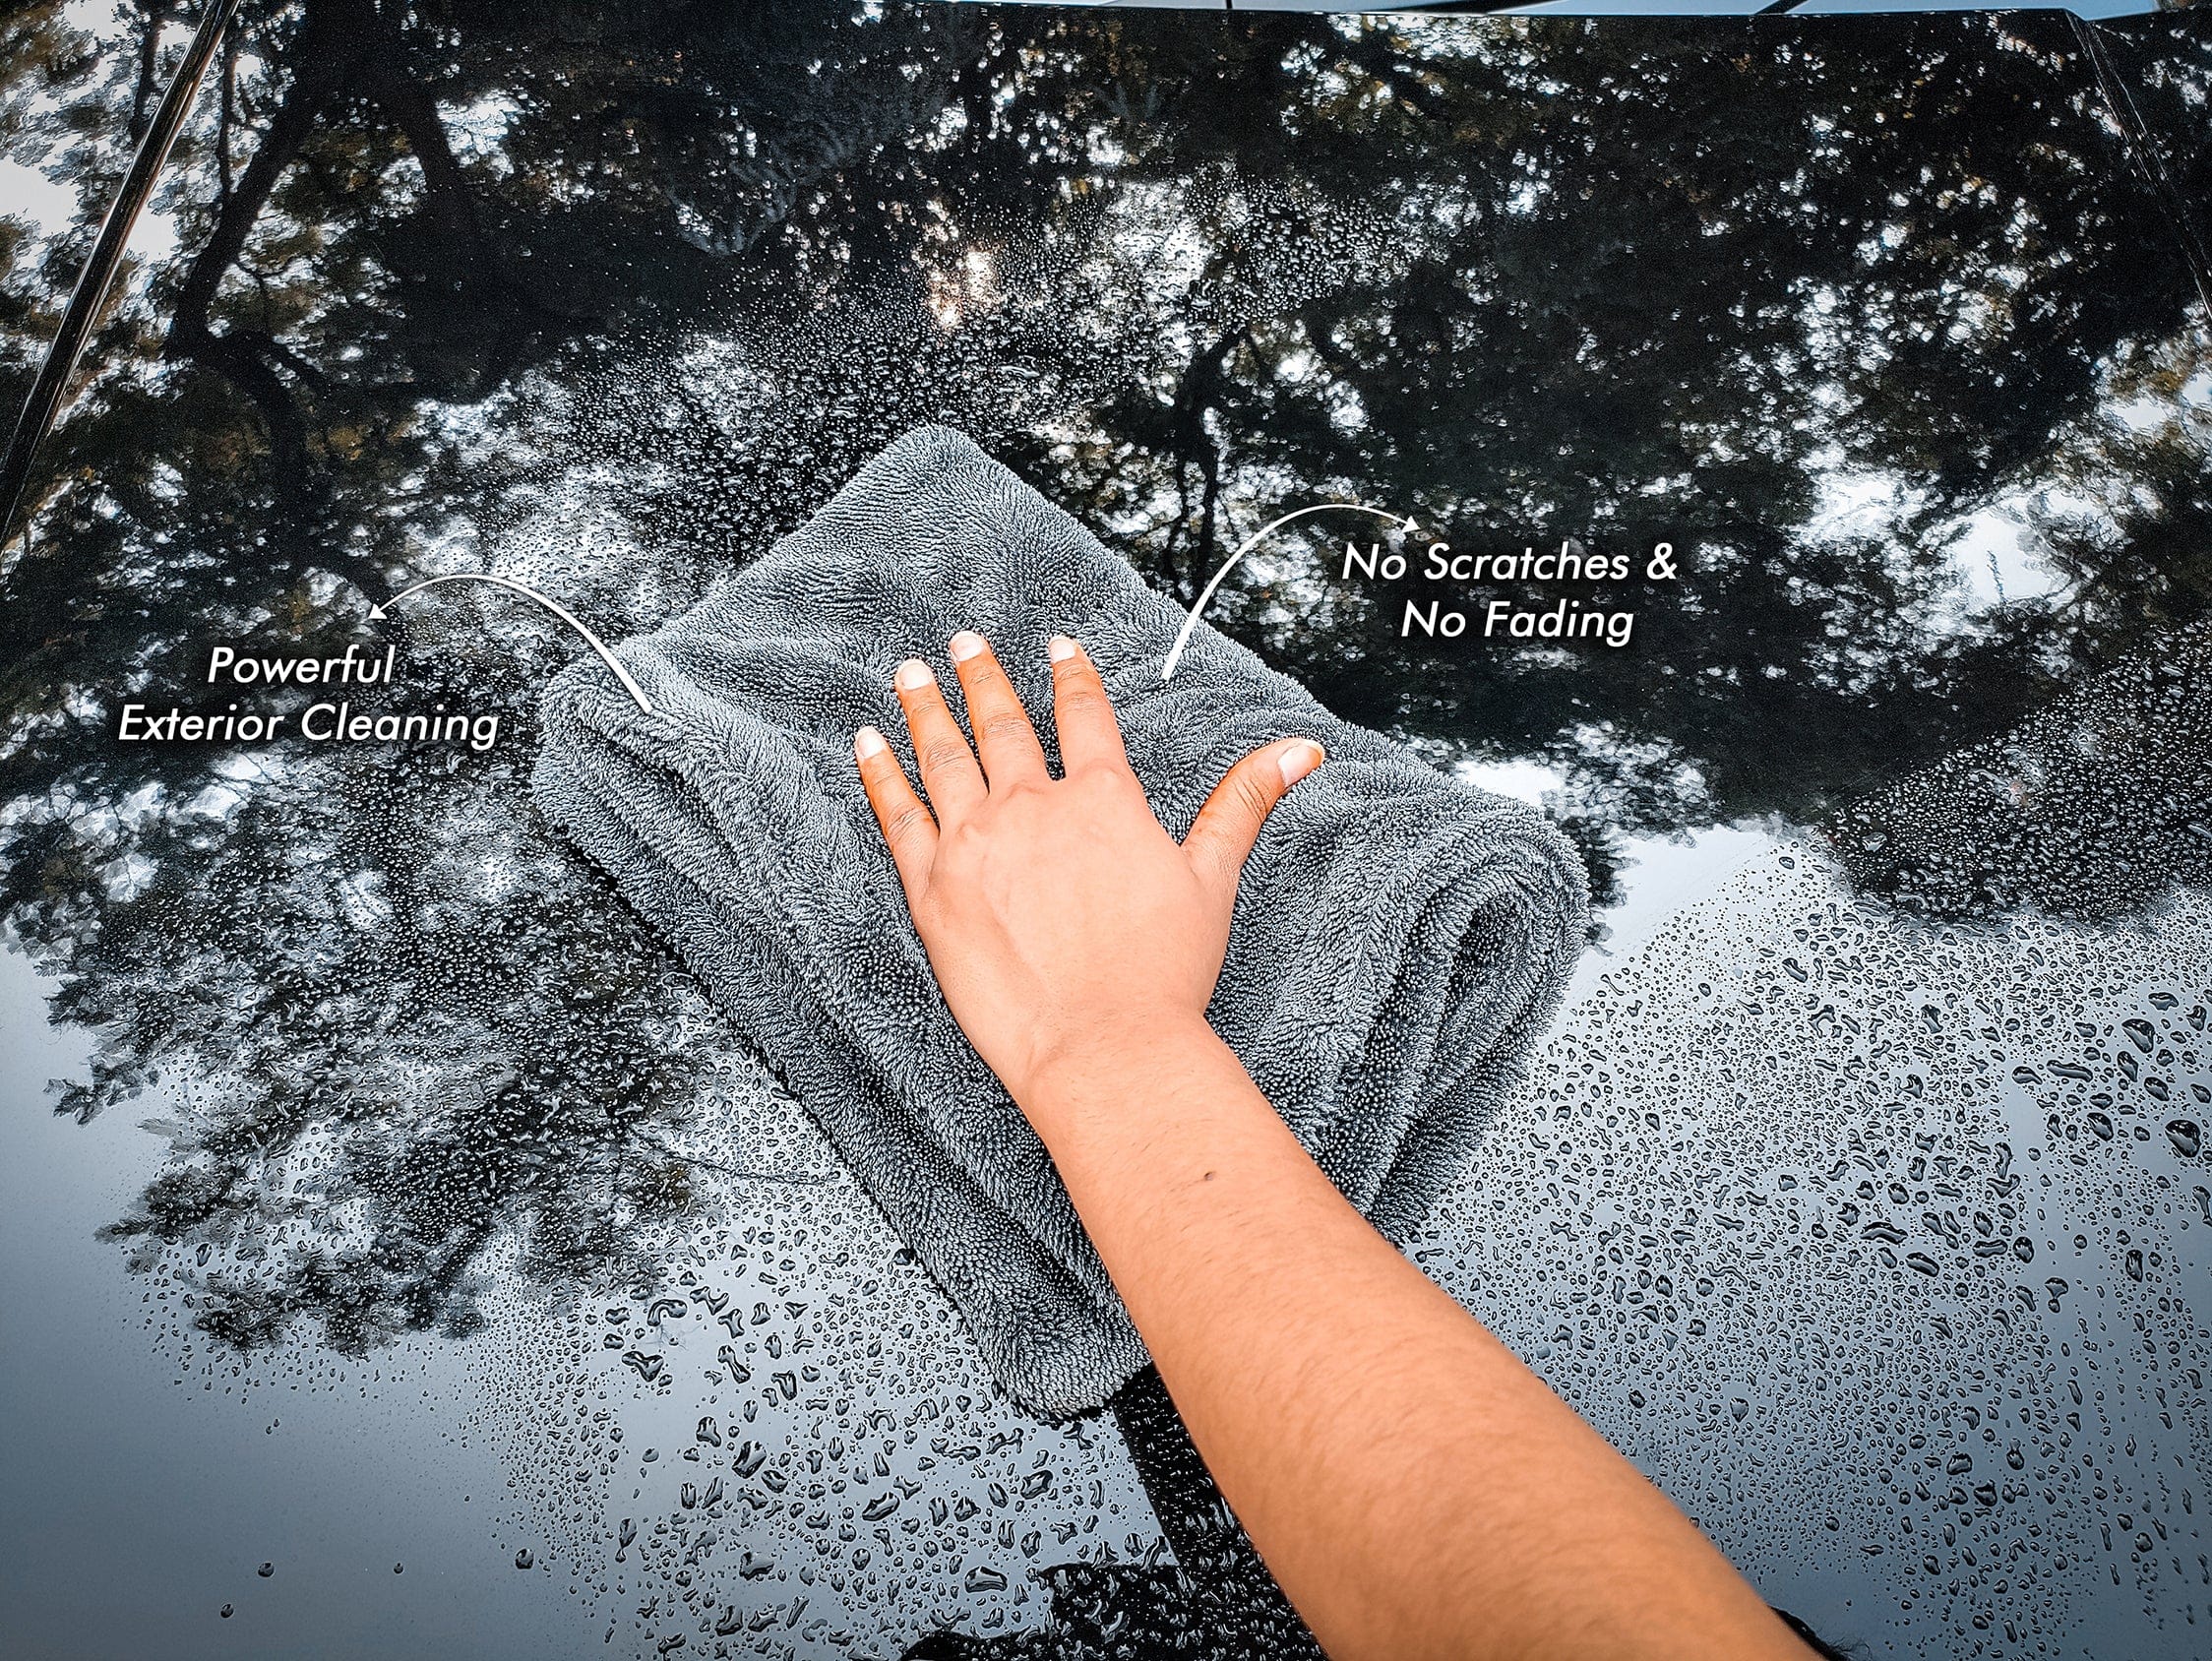 Powerful exterior cleaning with Microfiber lint free cloth - Softspun